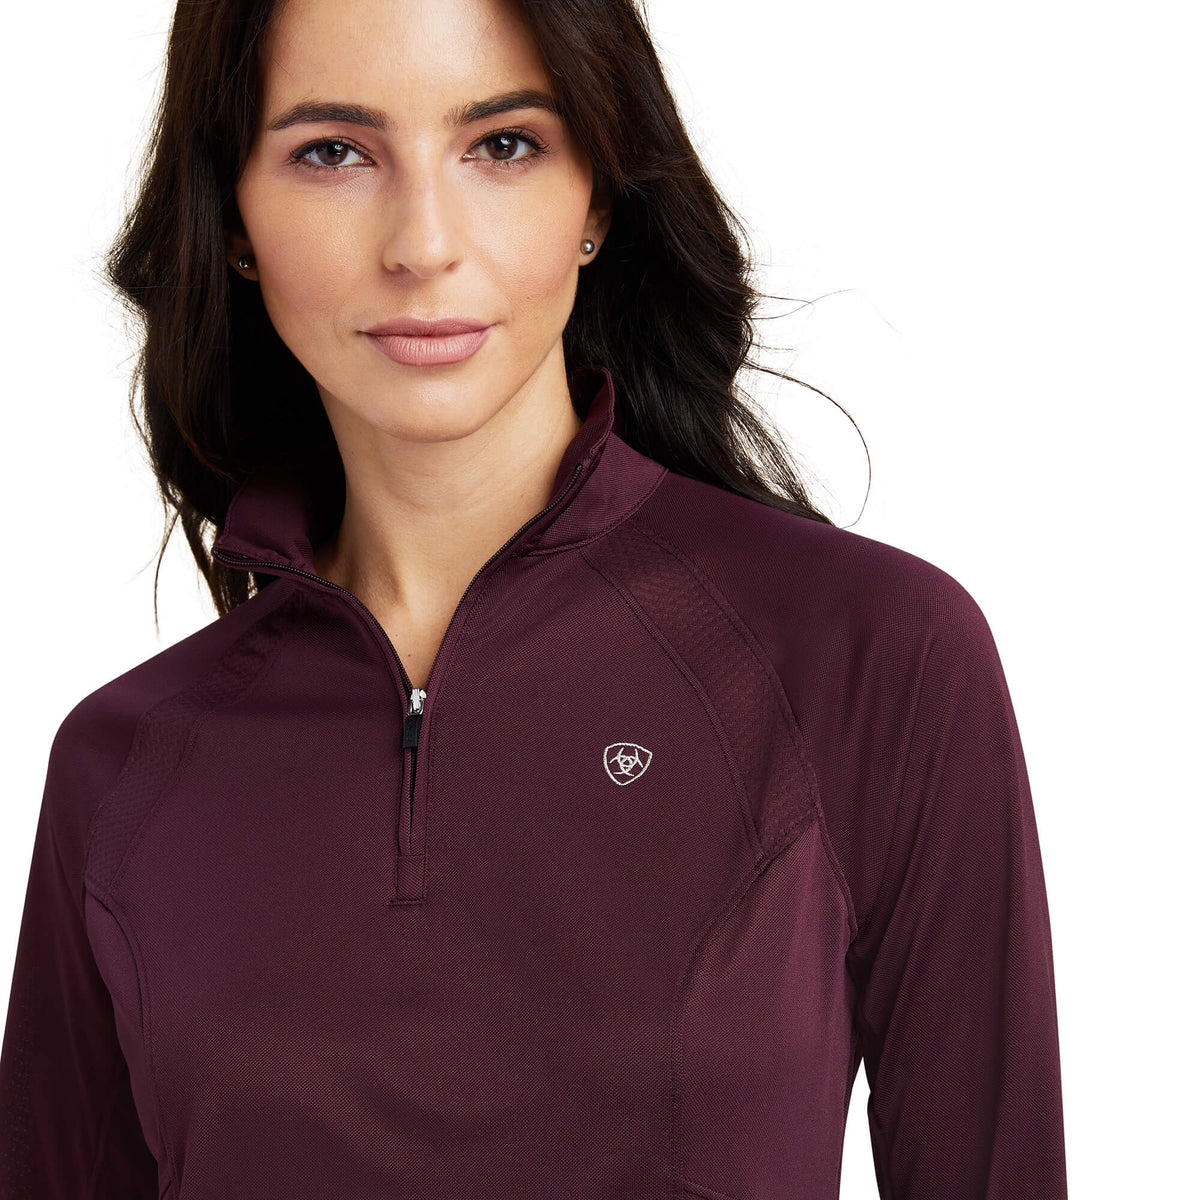 ARIAT CLOTHING Ariat Sunstopper 2.0 1/4 Zip in Mulberry